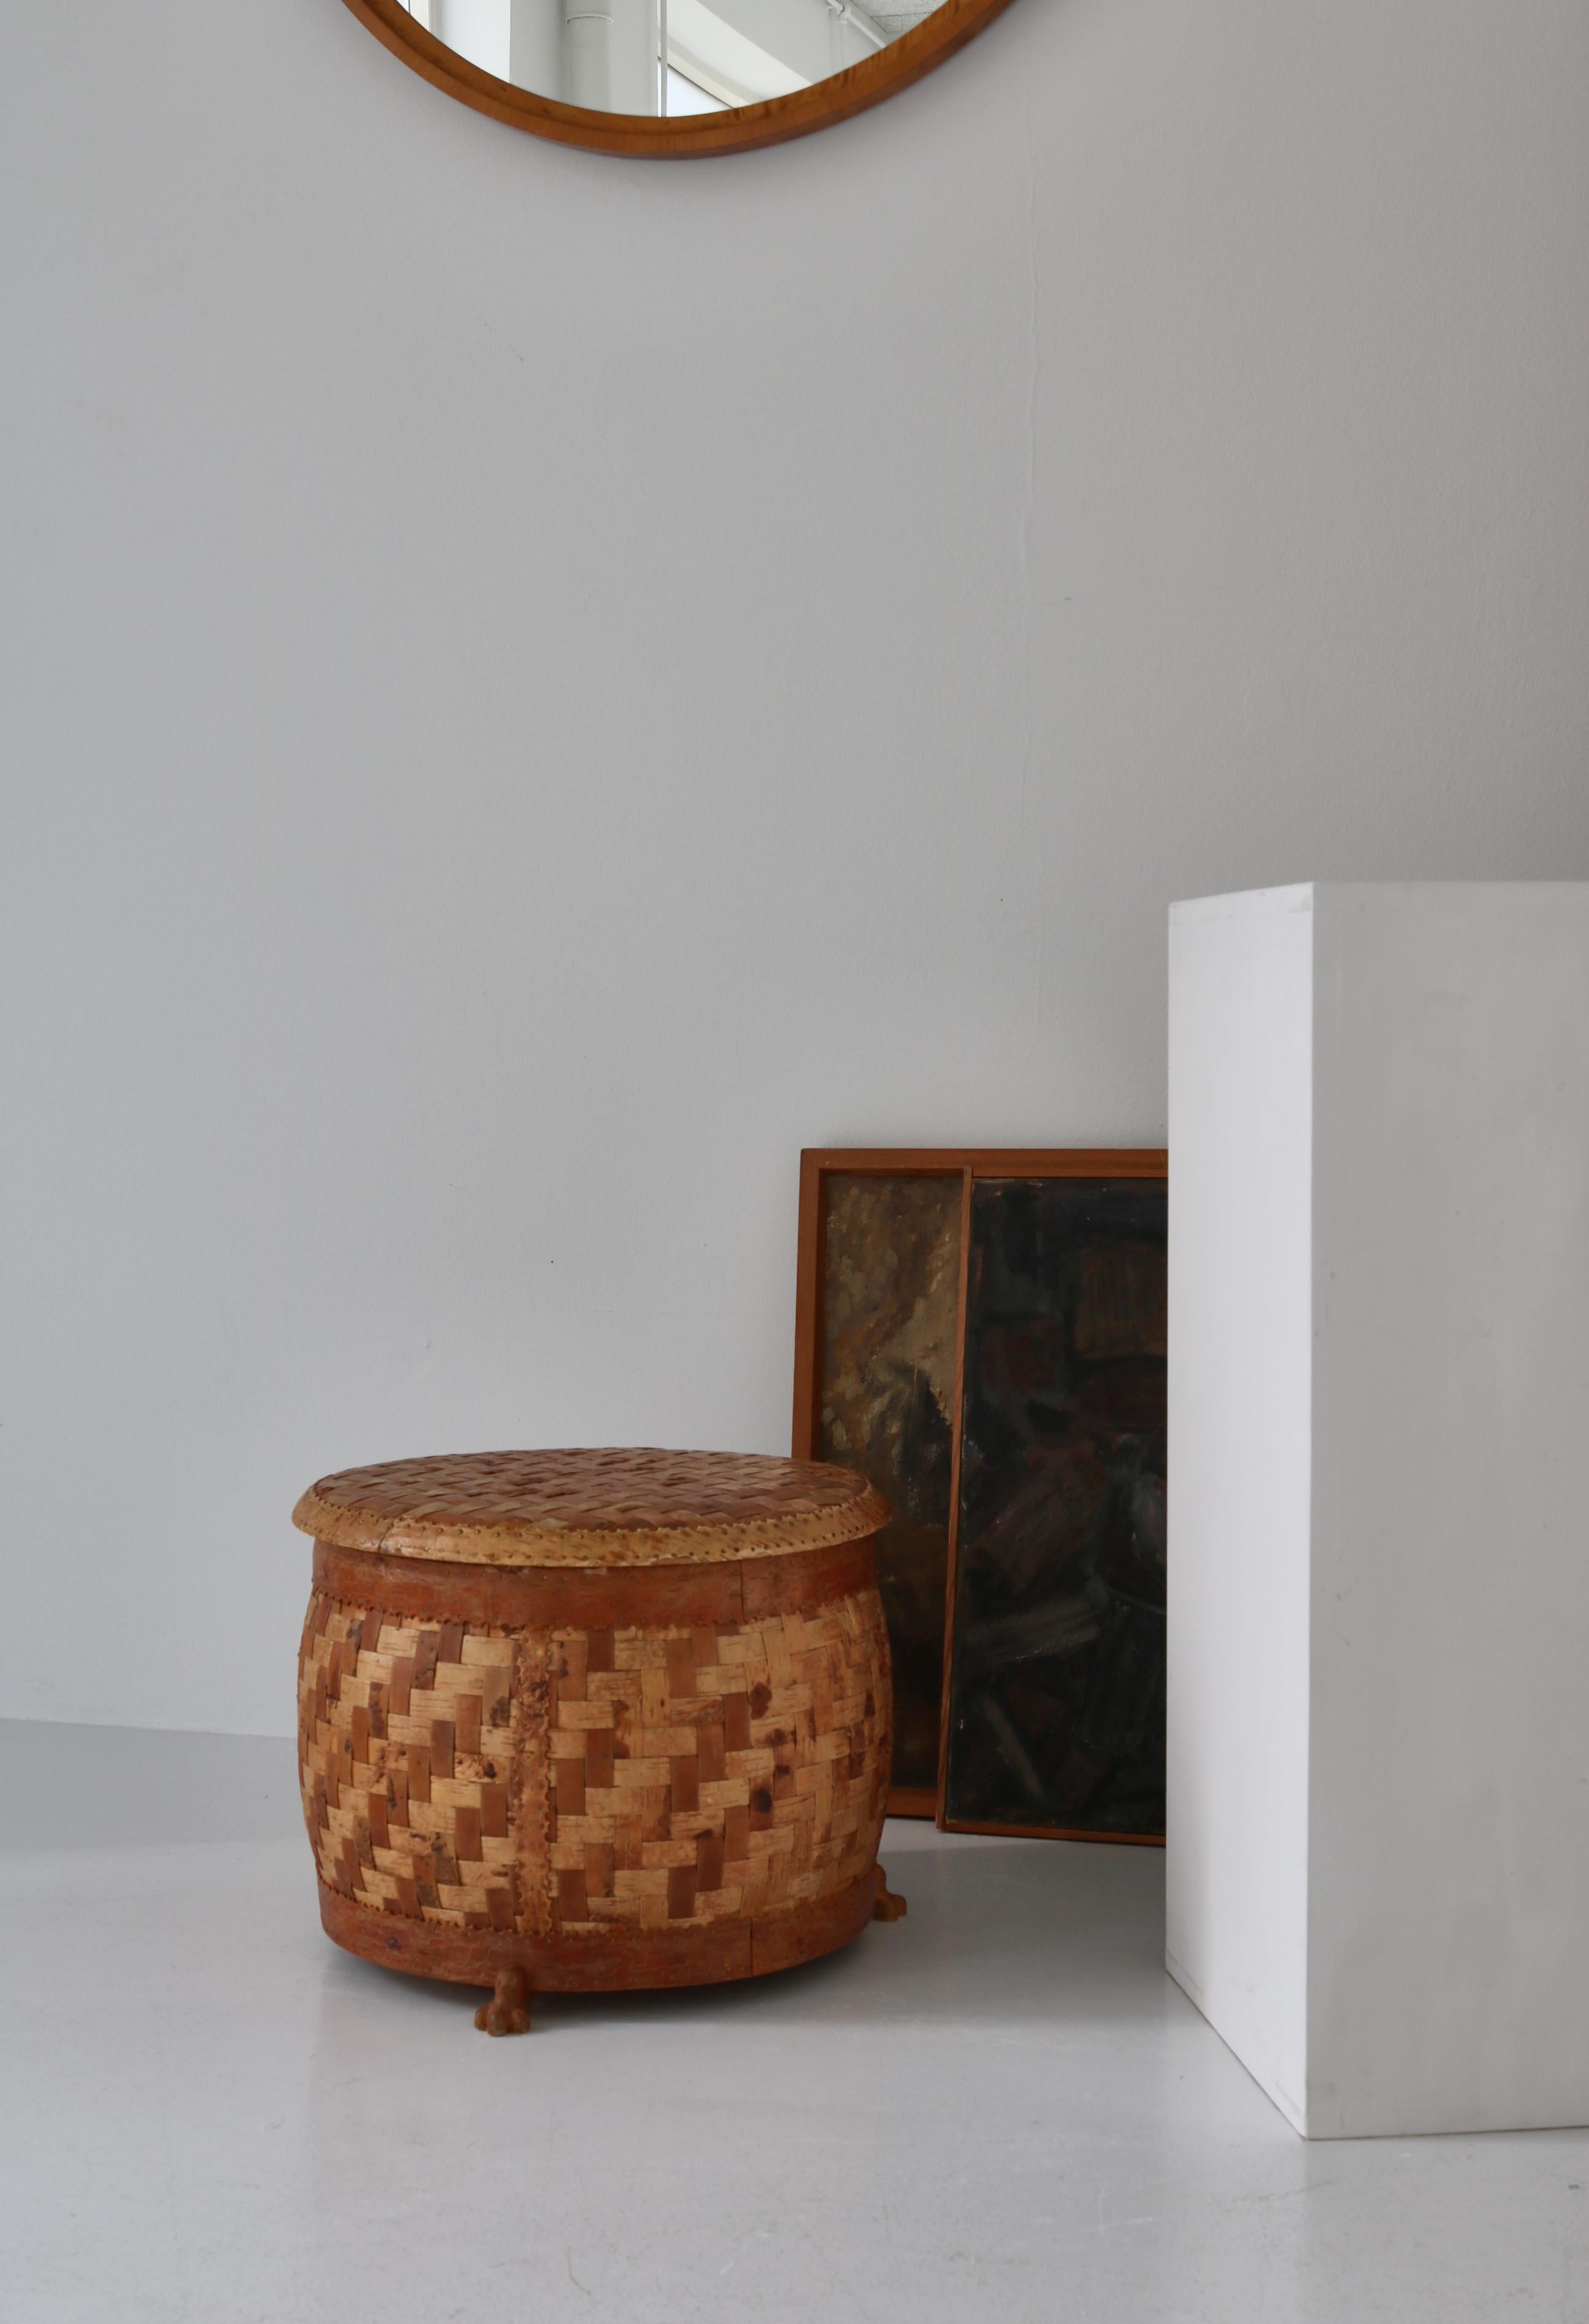 Handmade basket made in 1951 by Oscar Åhl. This wonderful basket is a great example of the traditional folk art movement 